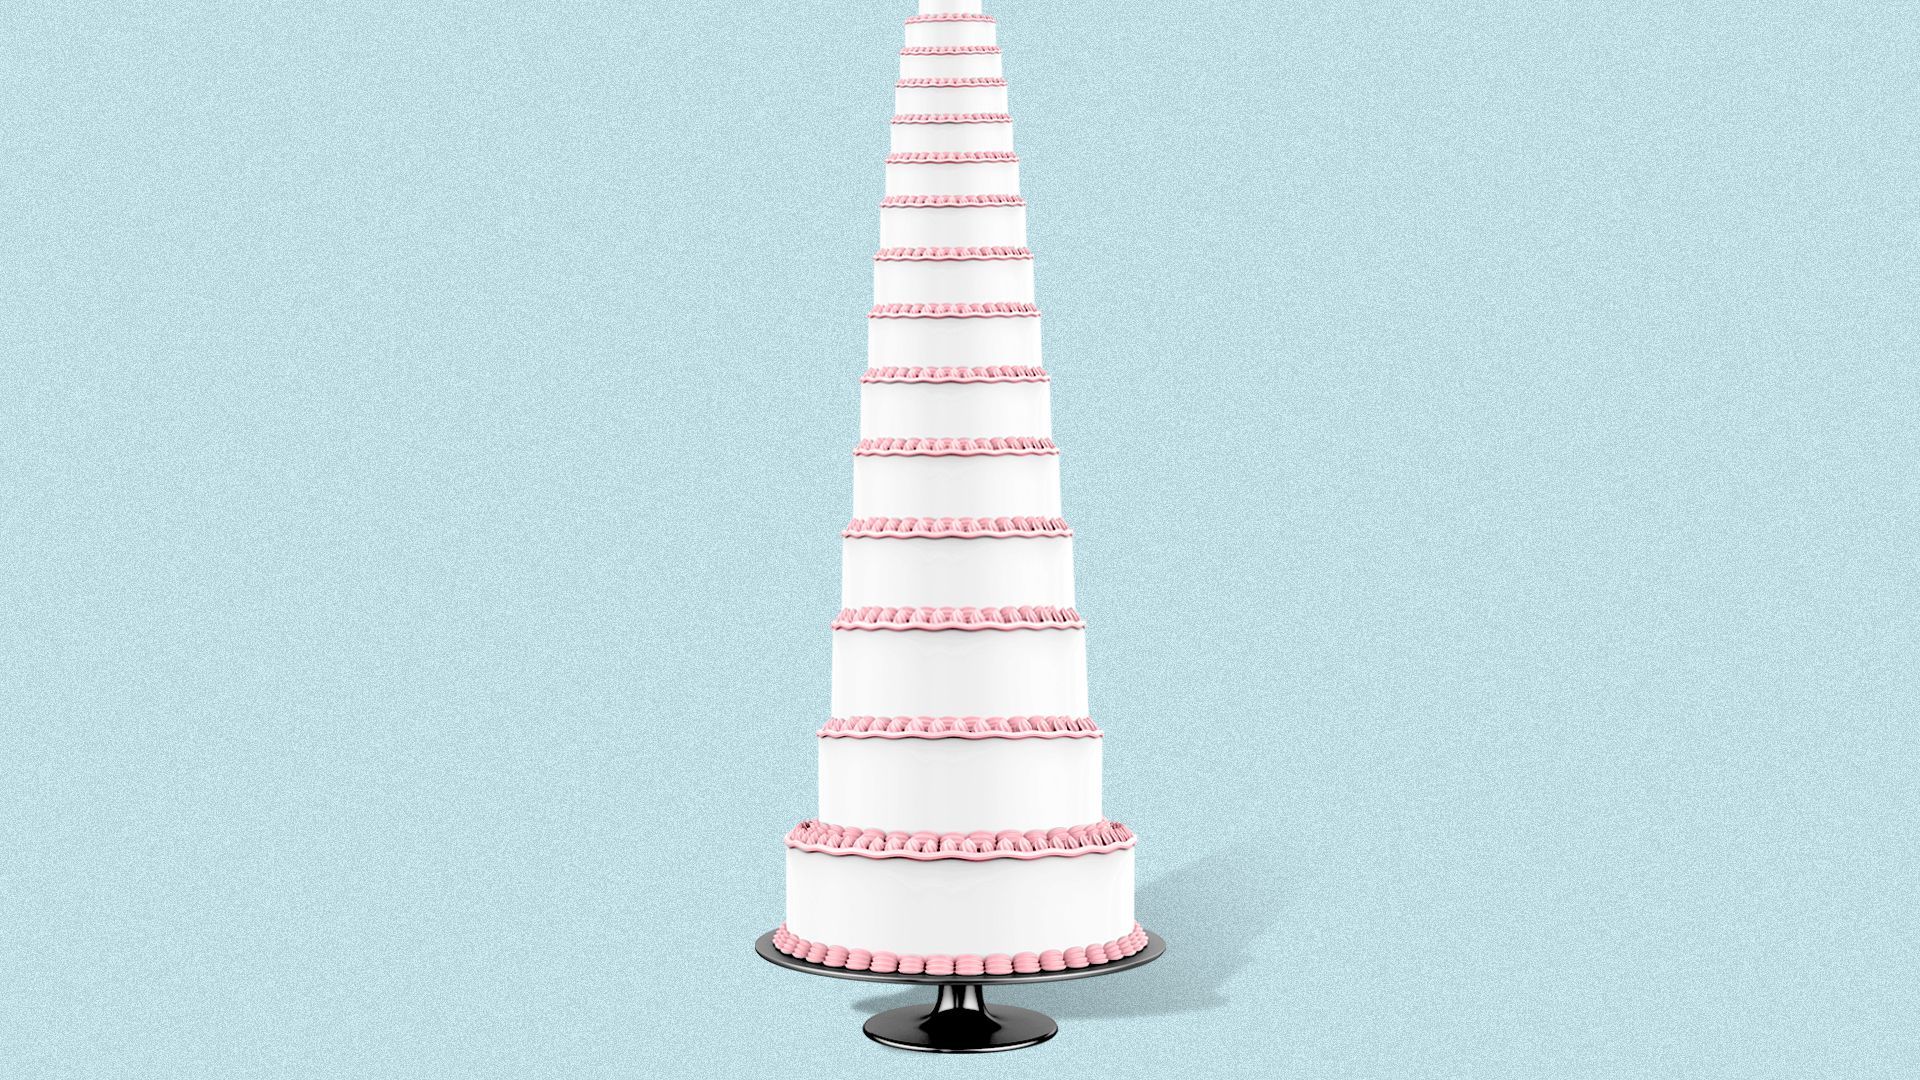 Illustration of a very tall wedding cake.